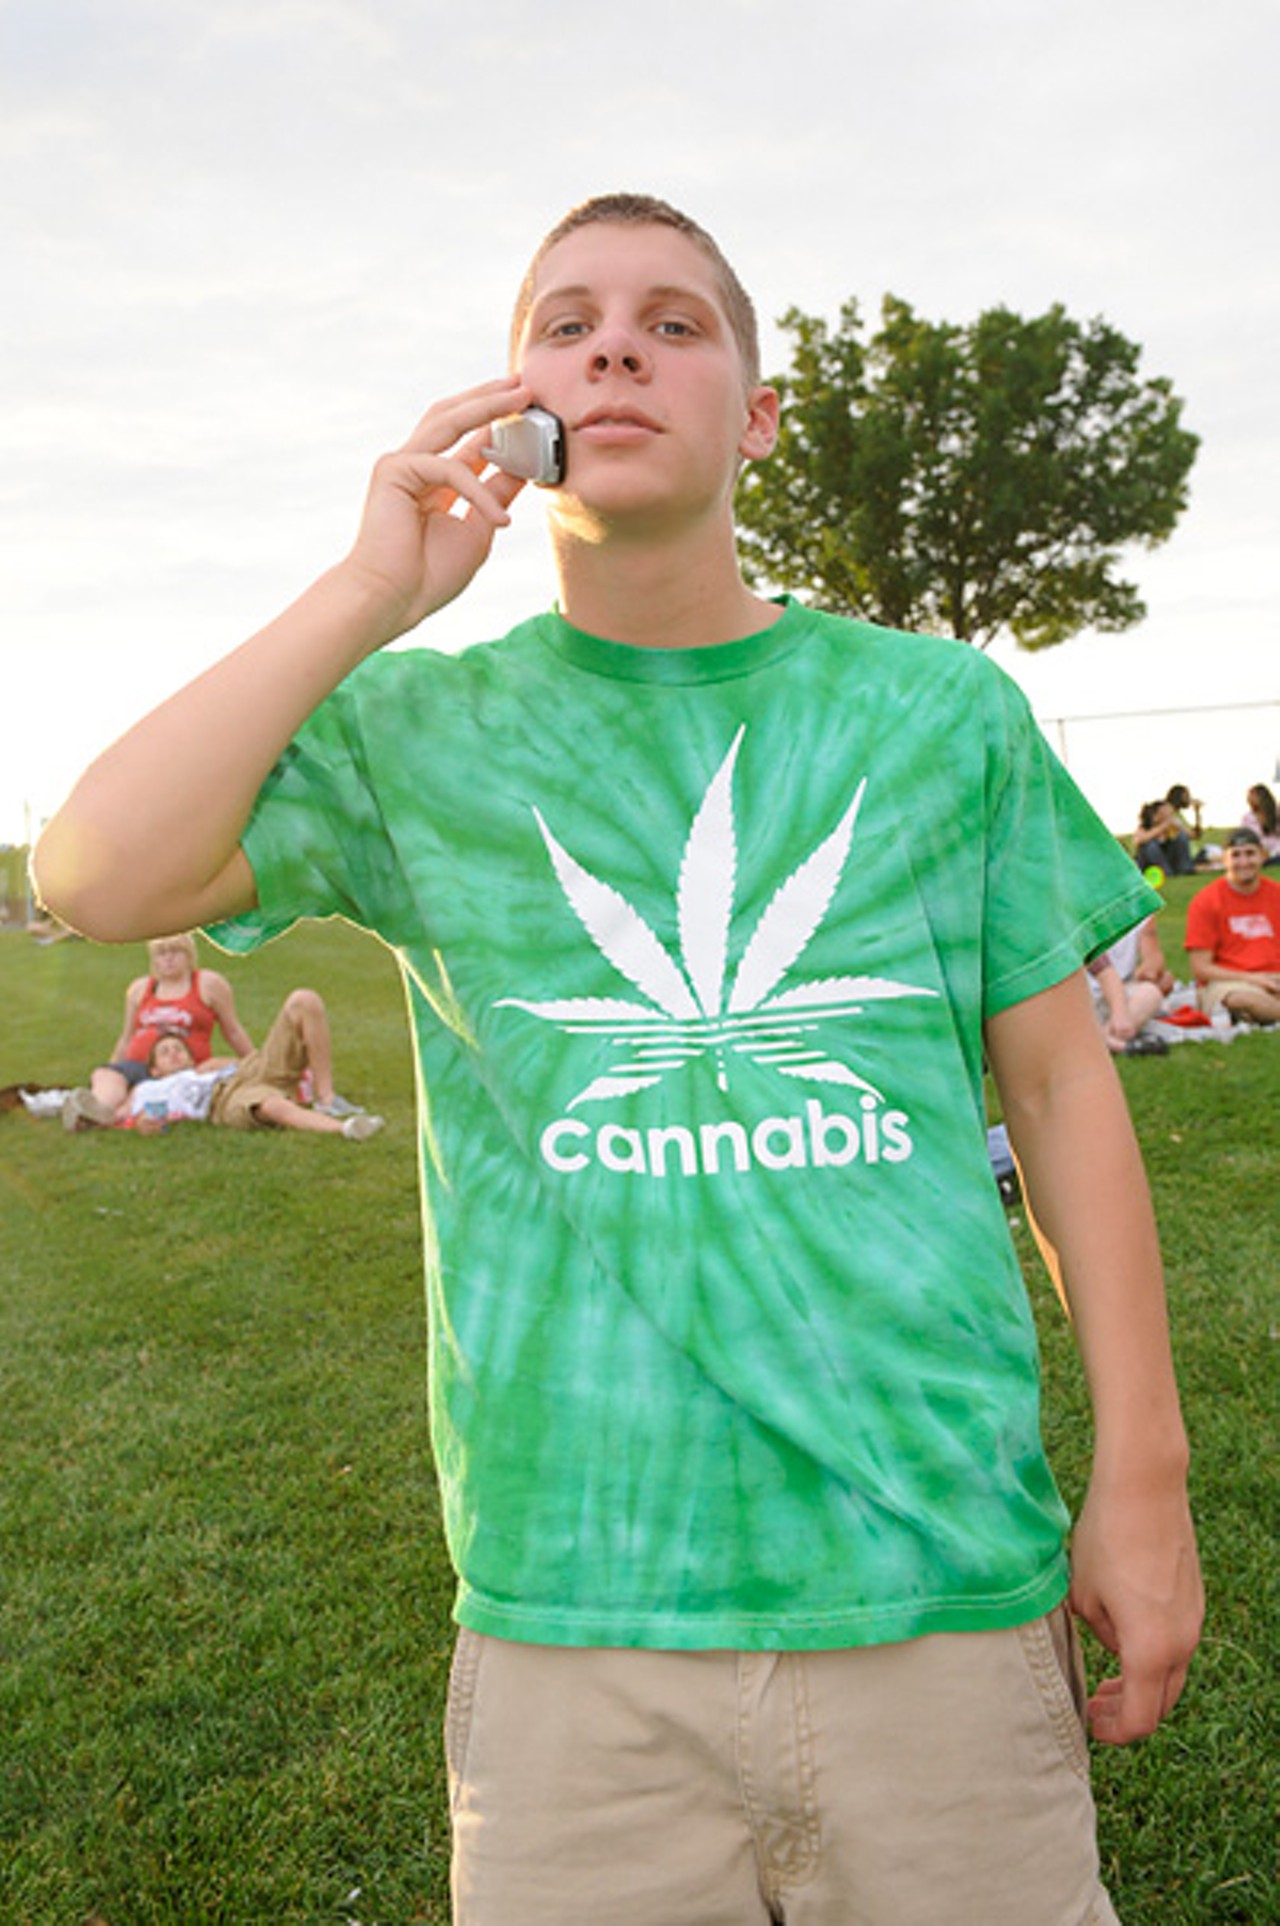 No summer concert would be complete without at least one t-shirt advocating the use of medicinal marijuana.